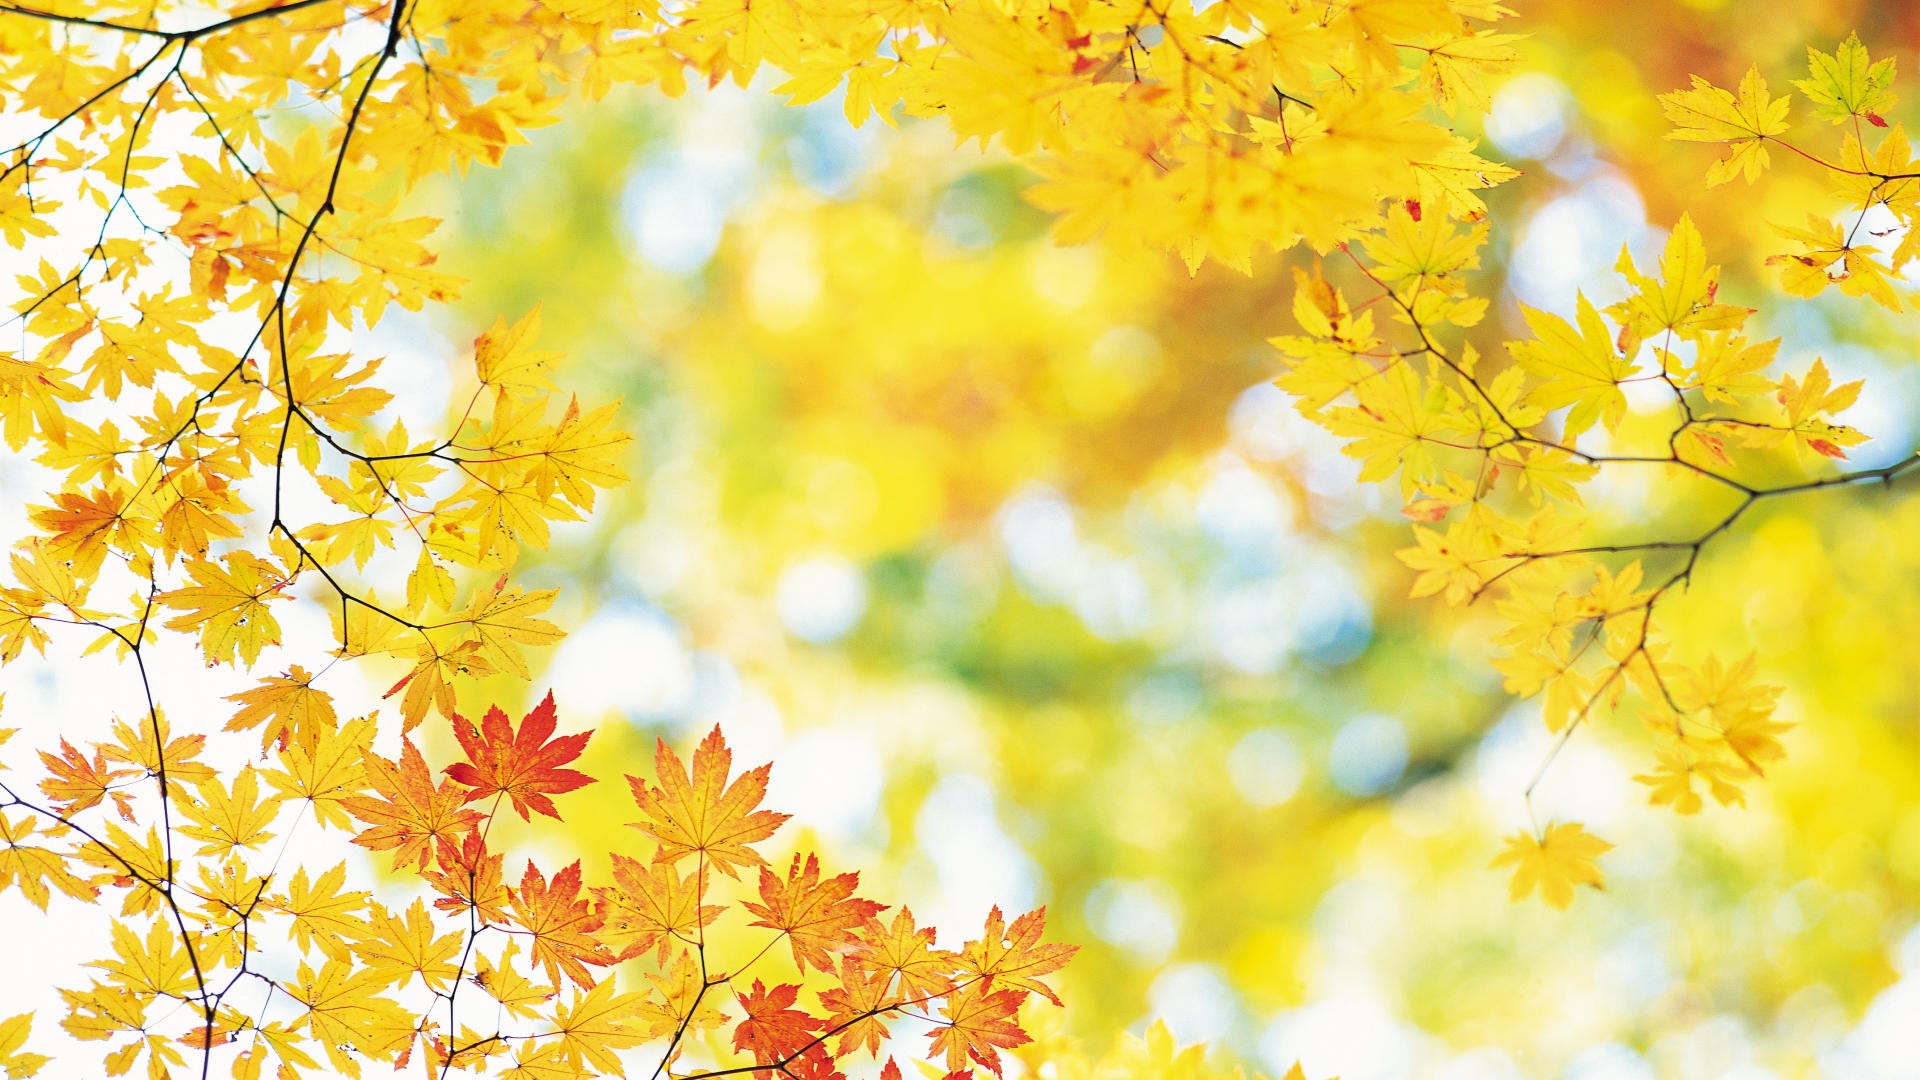 autumn leaves wallpaper,people in nature,tree,leaf,yellow,nature